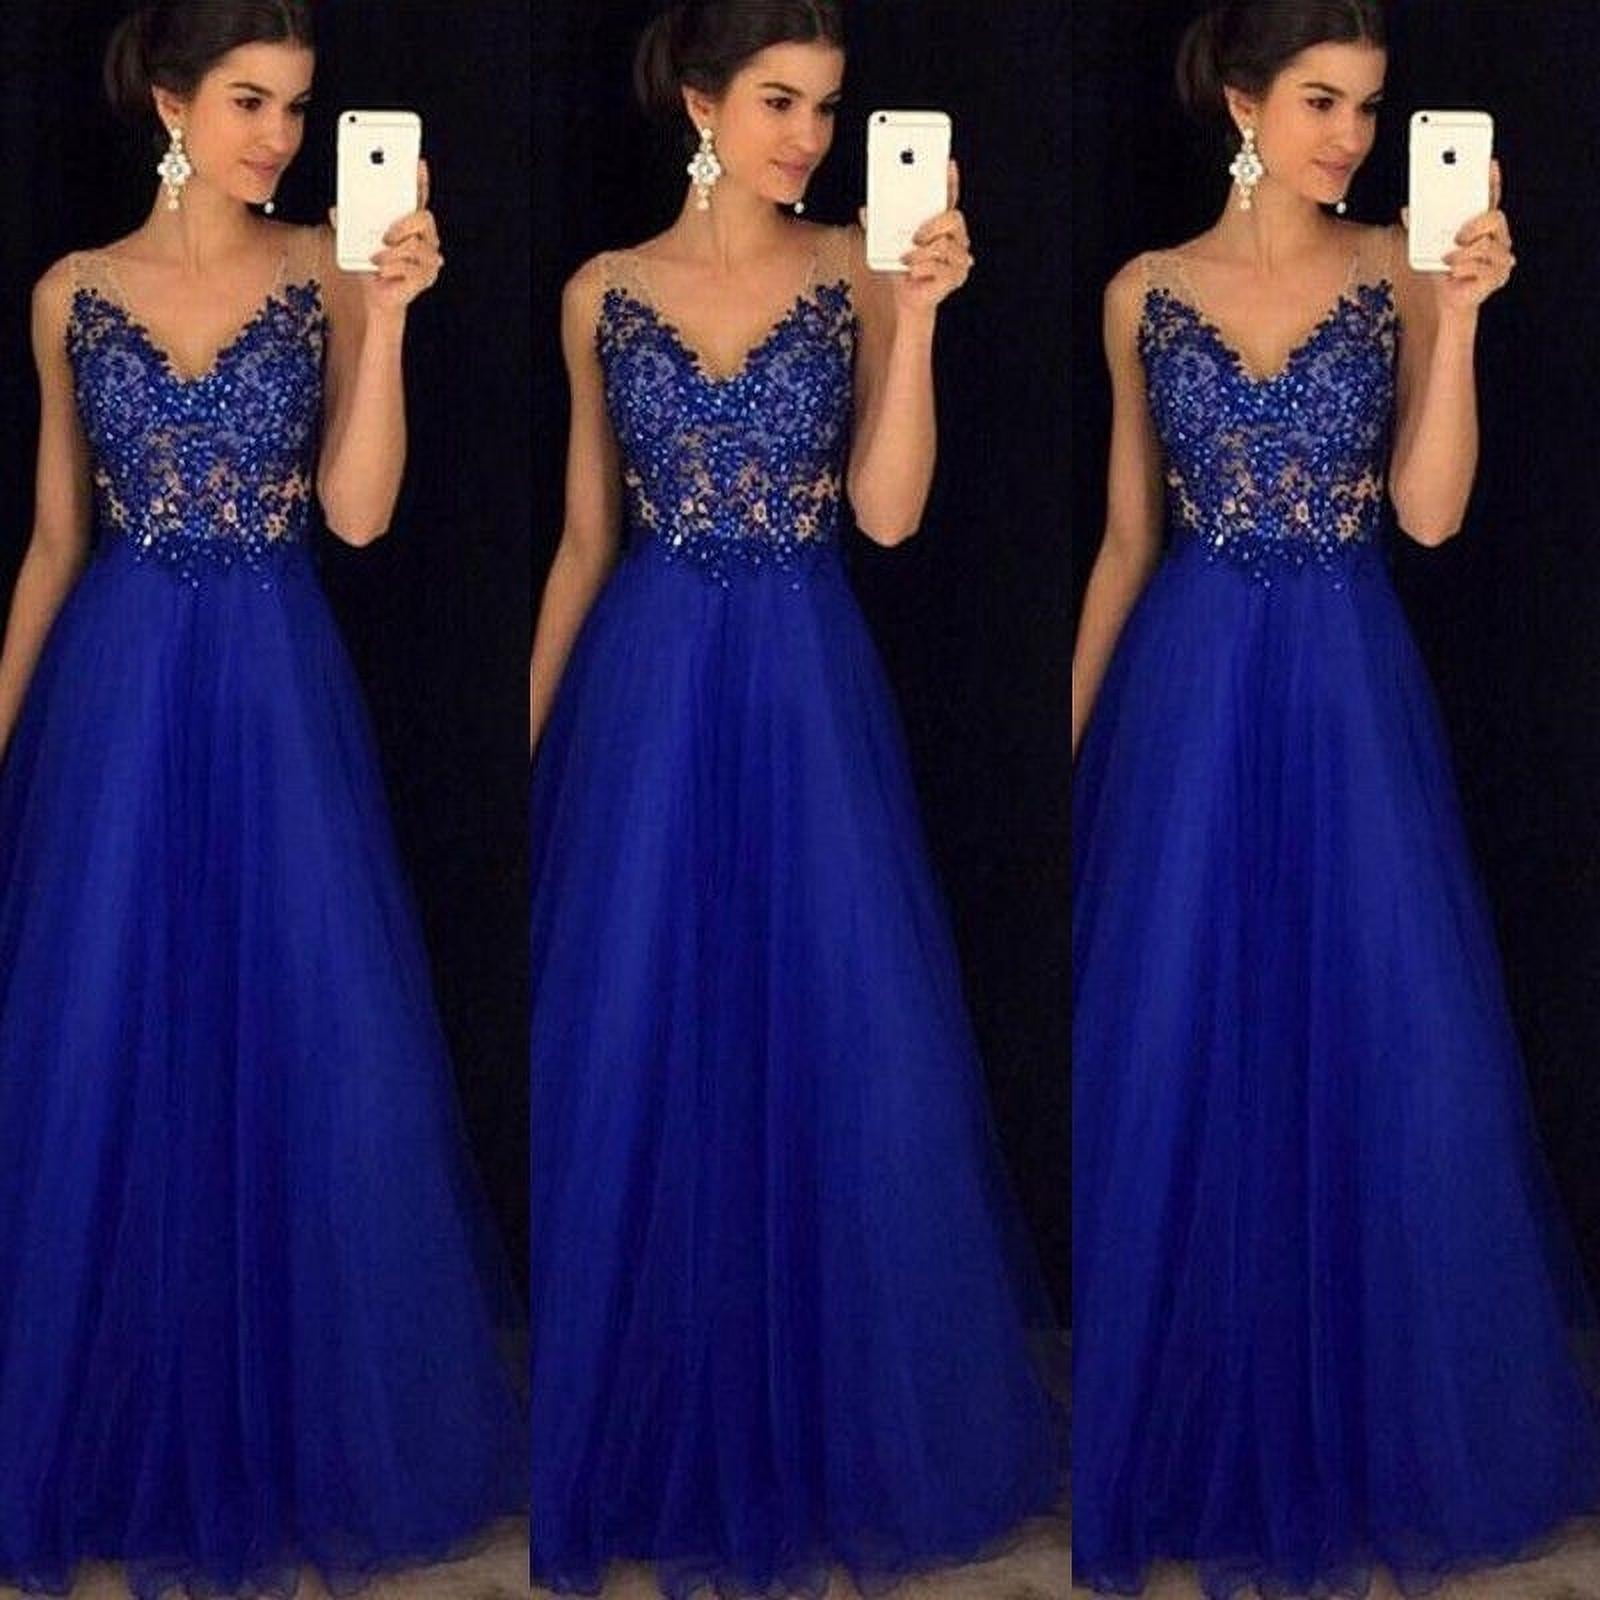 Women Formal Wedding Bridesmaid Evening Party Ball Prom Gown Long Cocktail Dress 